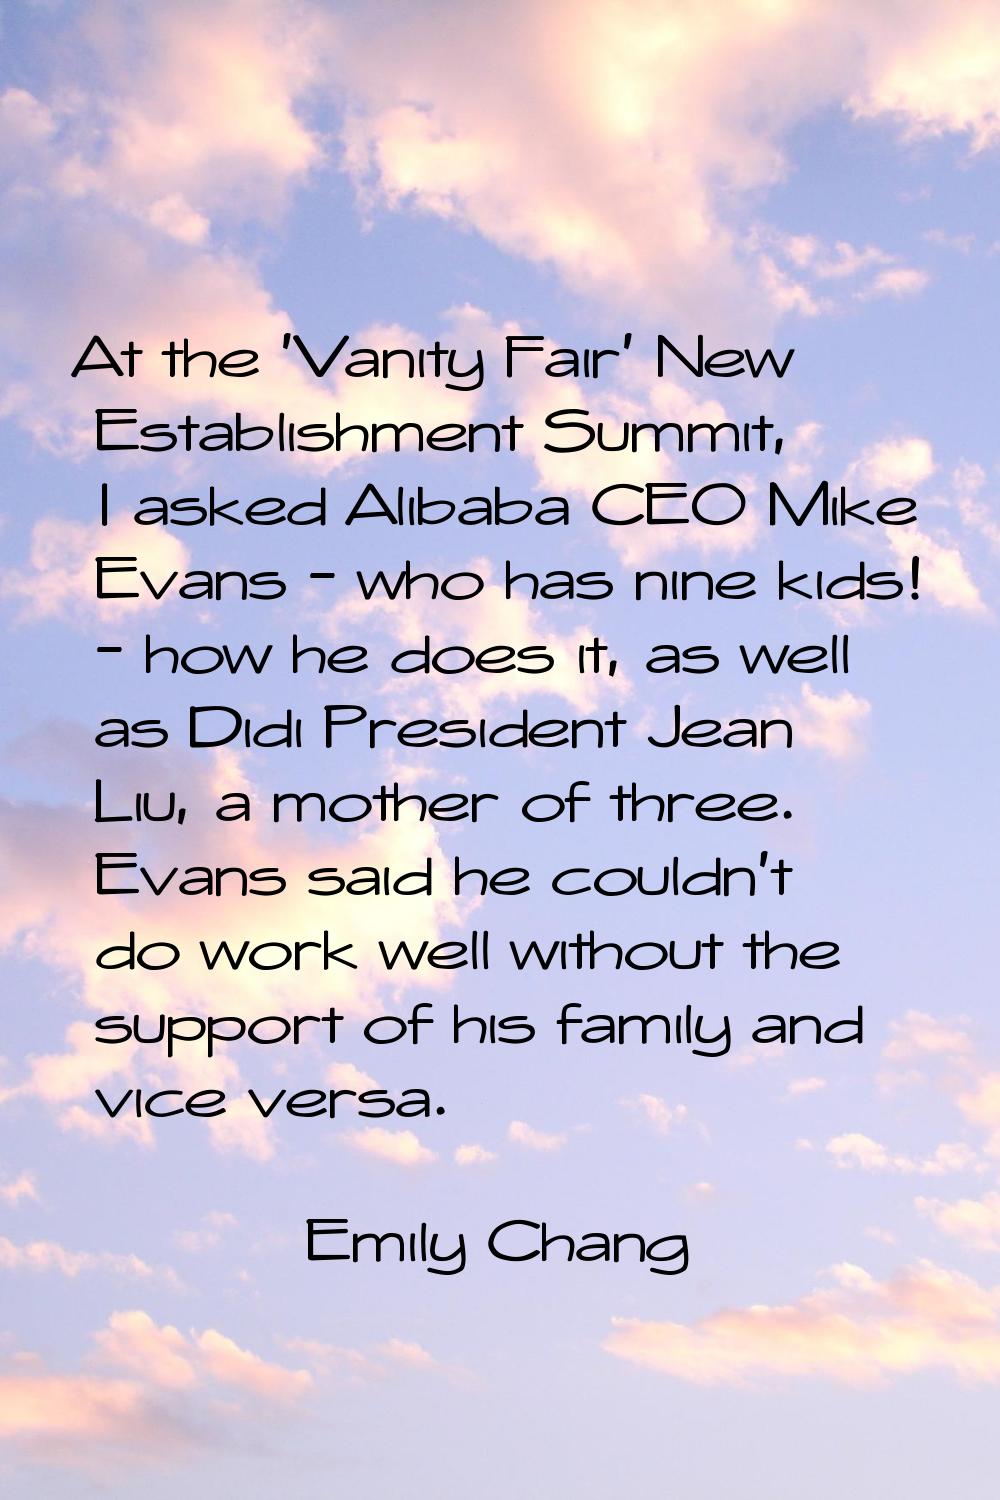 At the 'Vanity Fair' New Establishment Summit, I asked Alibaba CEO Mike Evans - who has nine kids! 